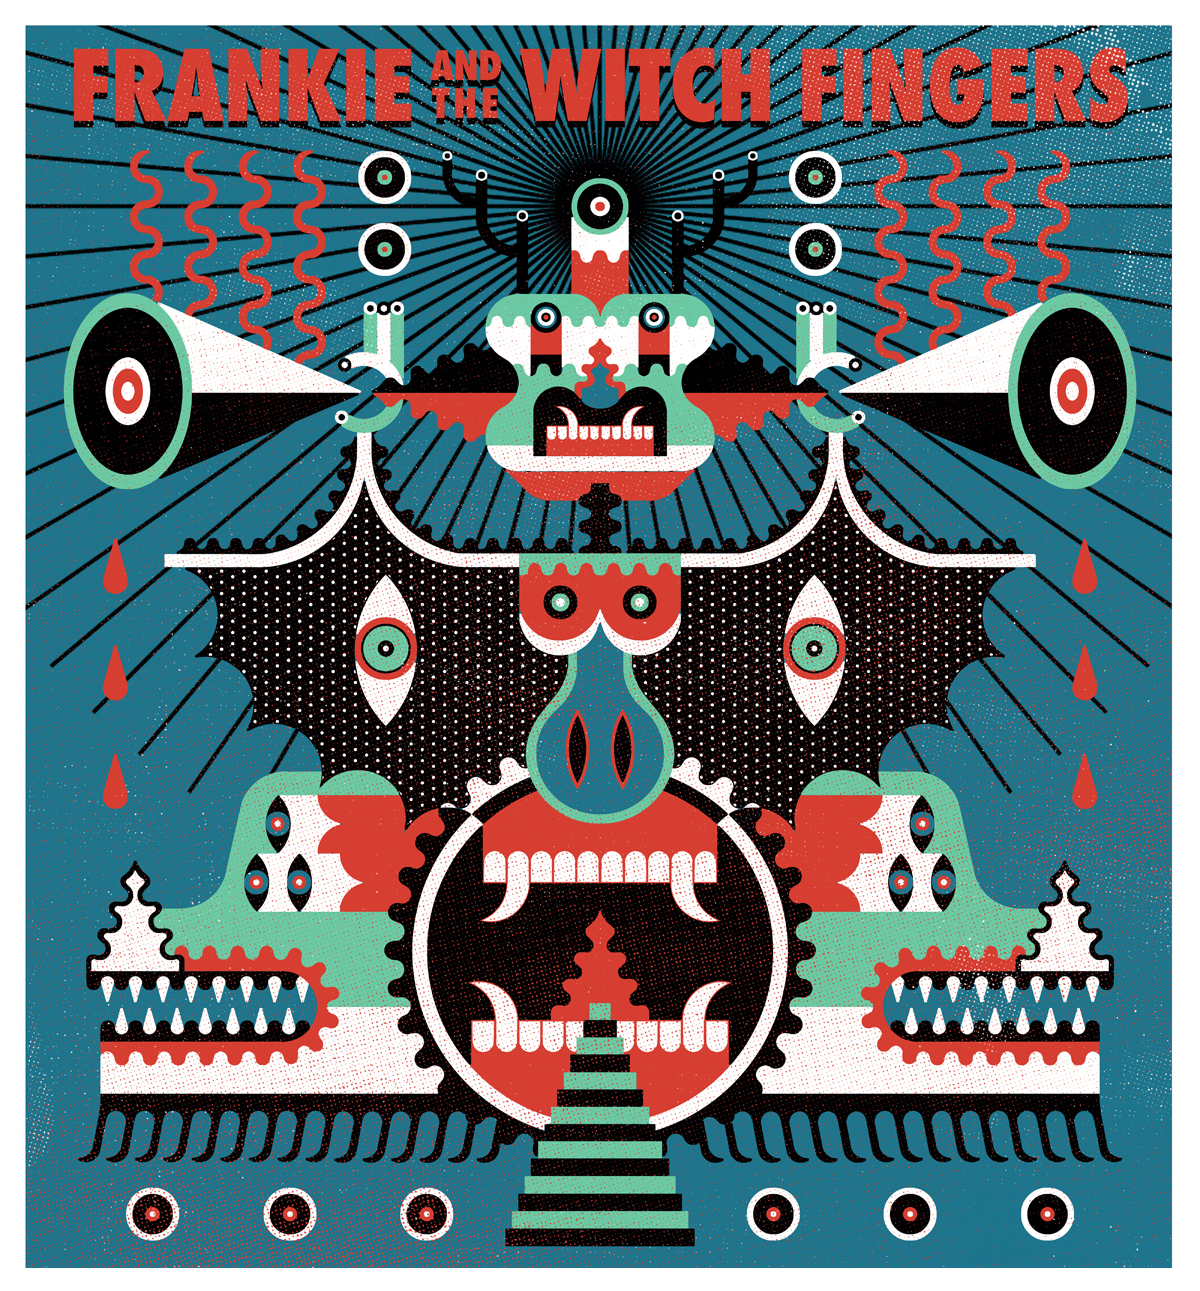 Frankie and the witch fingers